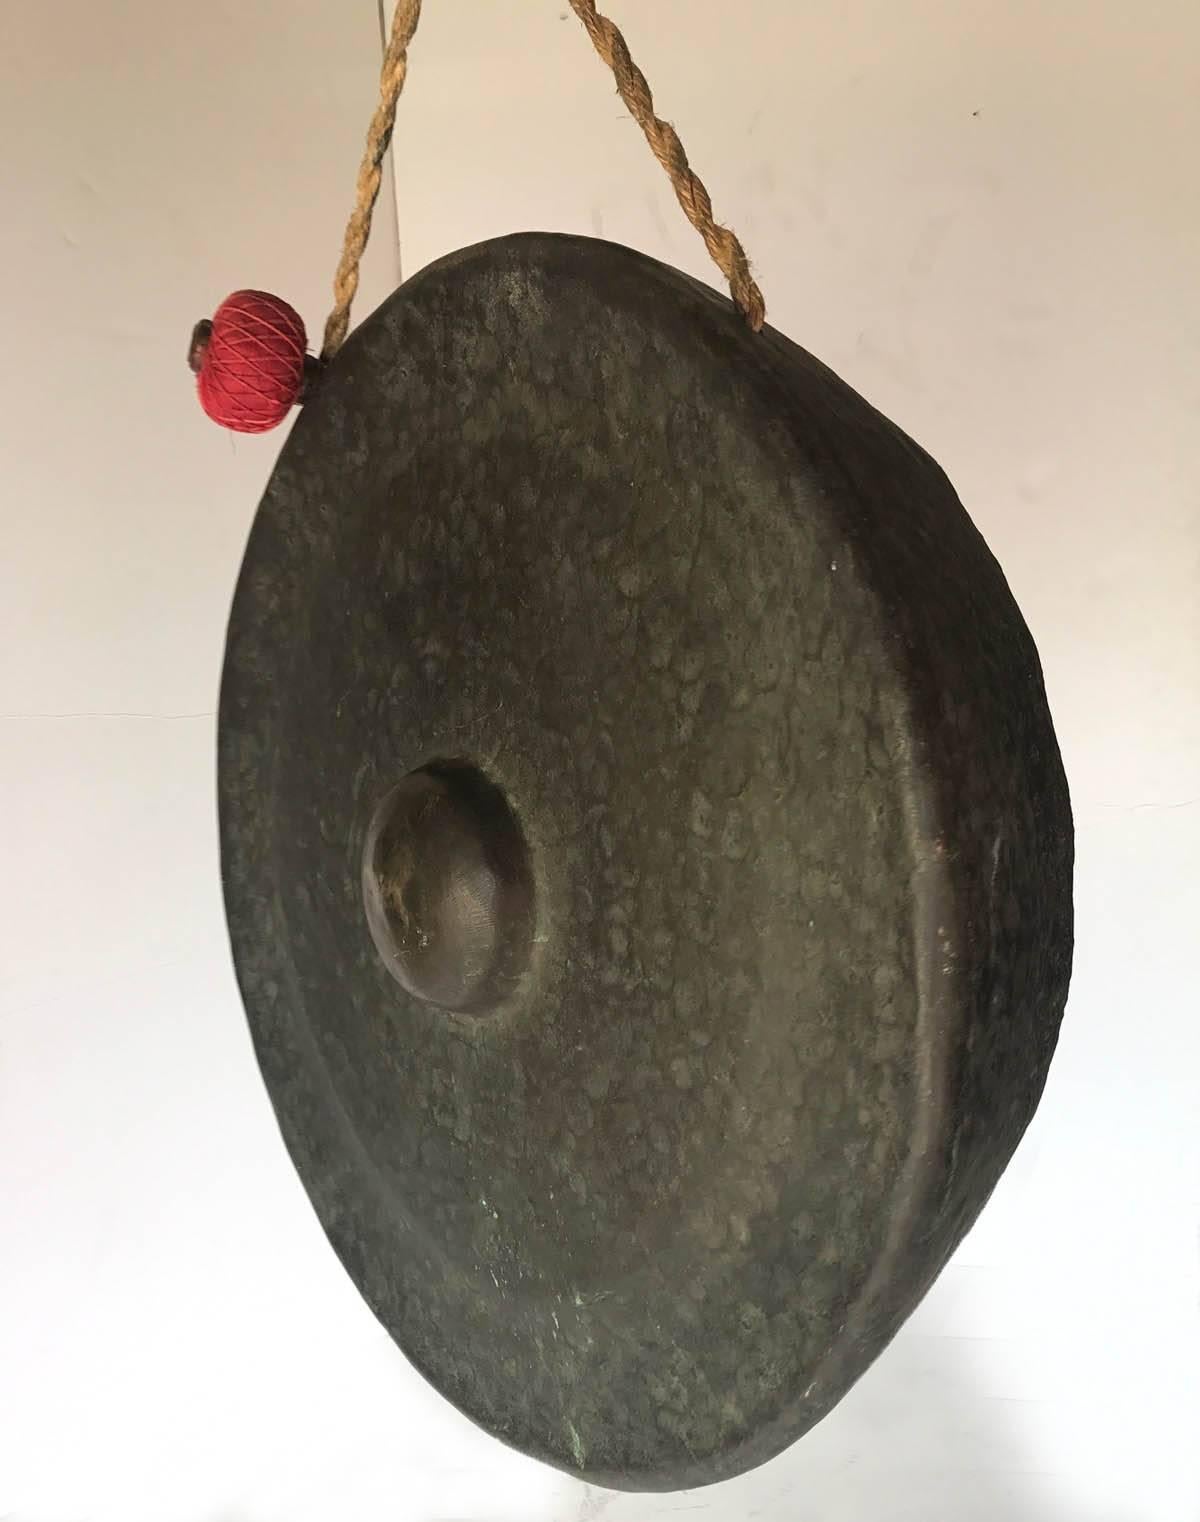 20th century Indonesian hand-forged solid bronze gong with red striker. Deep resonant sound. Bronze patina and large size makes this piece a Classic example of simple elegant, functional design. It is 30